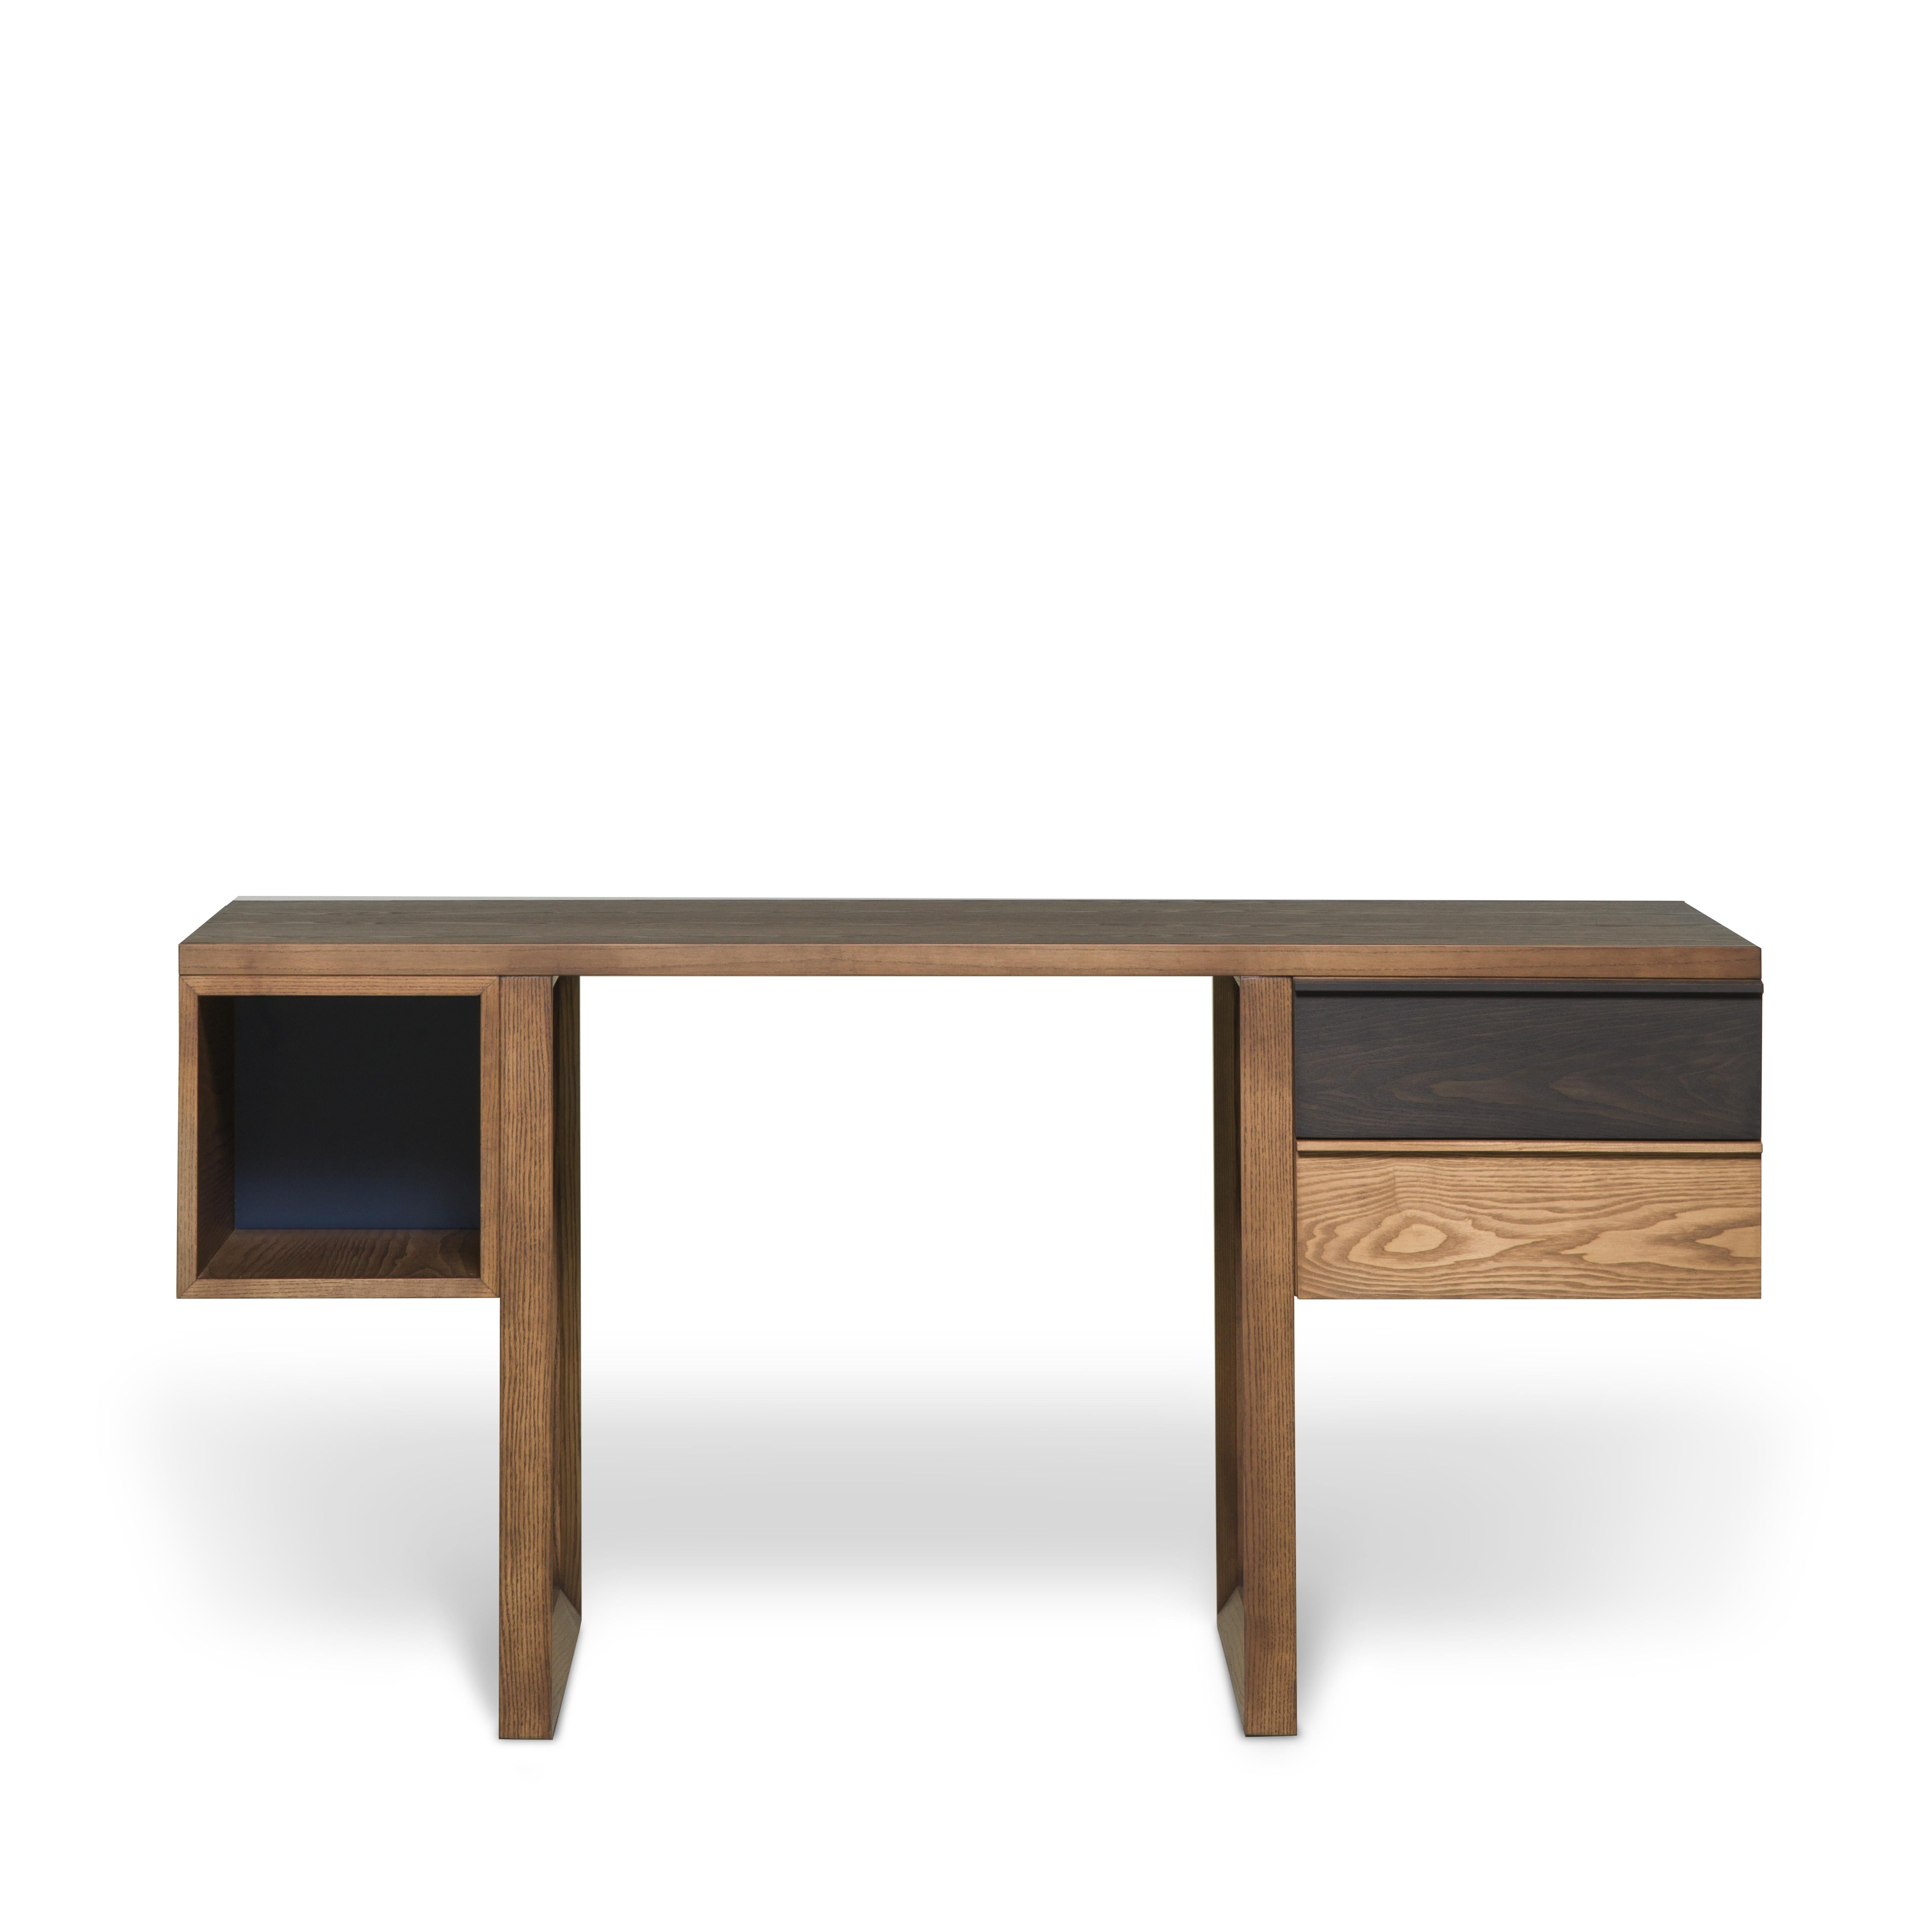 Writing desk made of ashwood with one open element and two drawers
available in different finishes.
Made in Italy